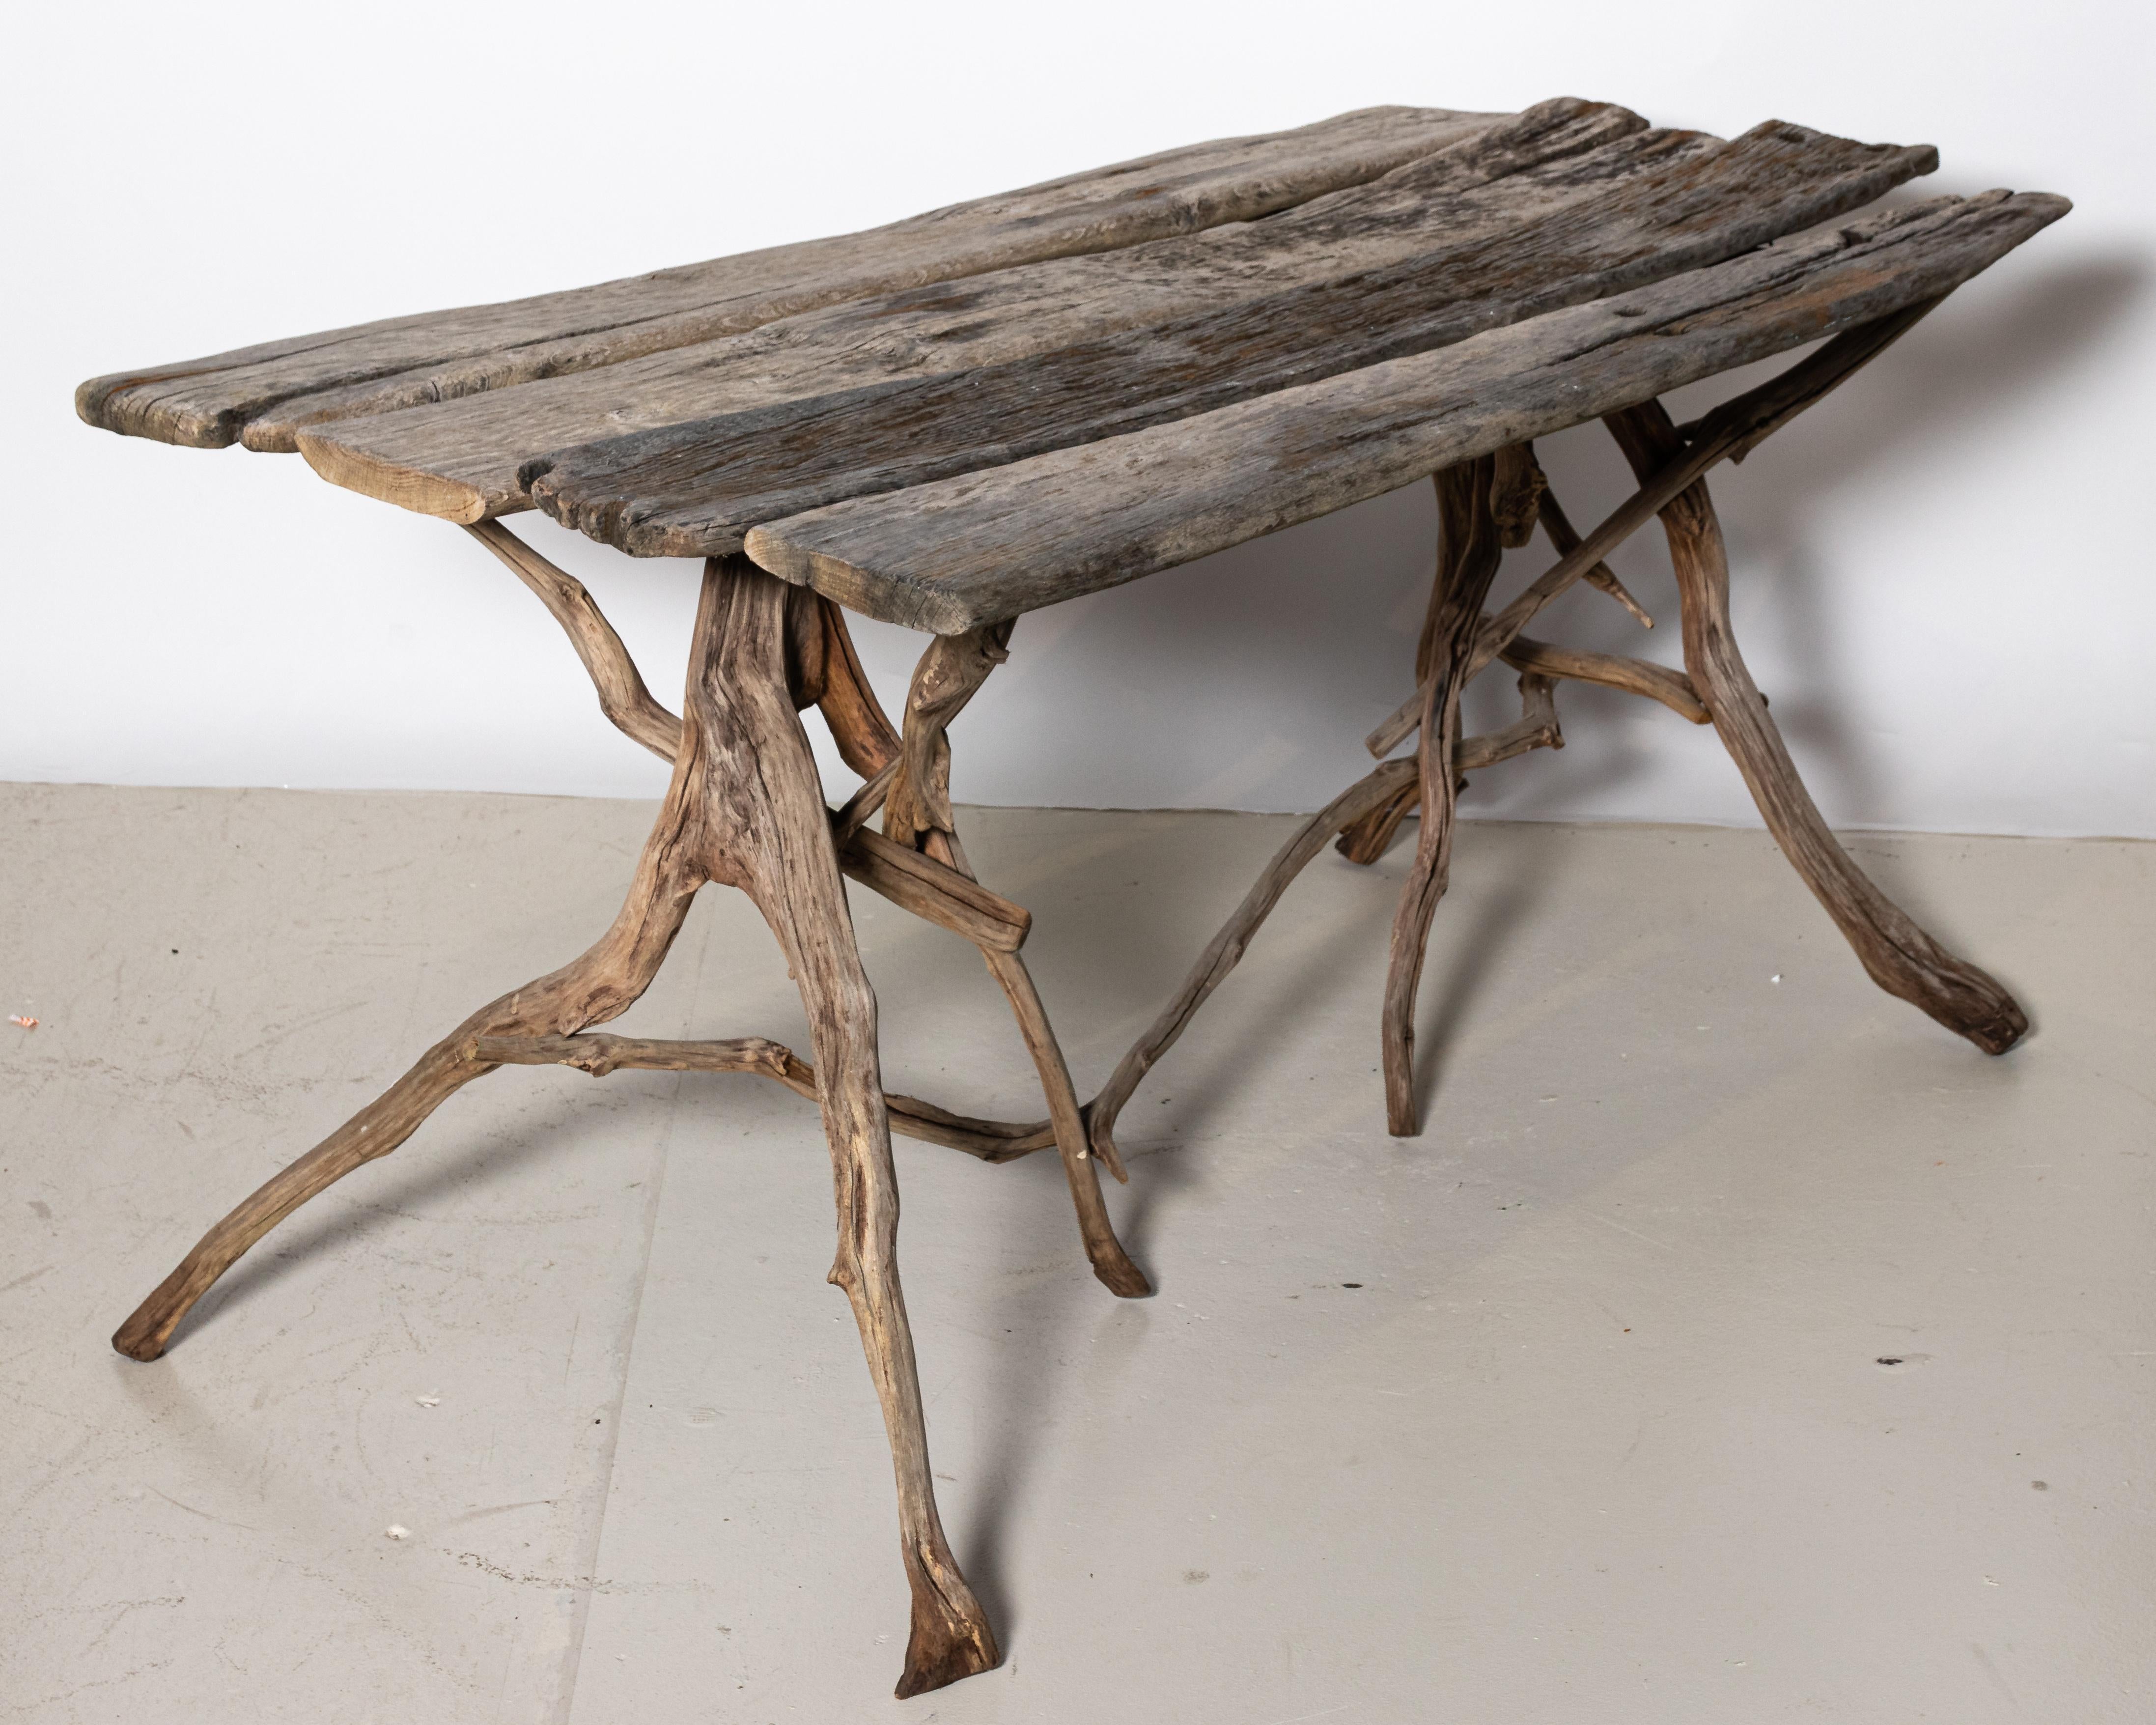 Estate made garden or outdoor dining table, circa early 20th century. The piece is composed of driftwood and reclaimed wood in a rough hewn finish. Please note of wear consistent with age and weathering due to exposure to the elements. Made in the